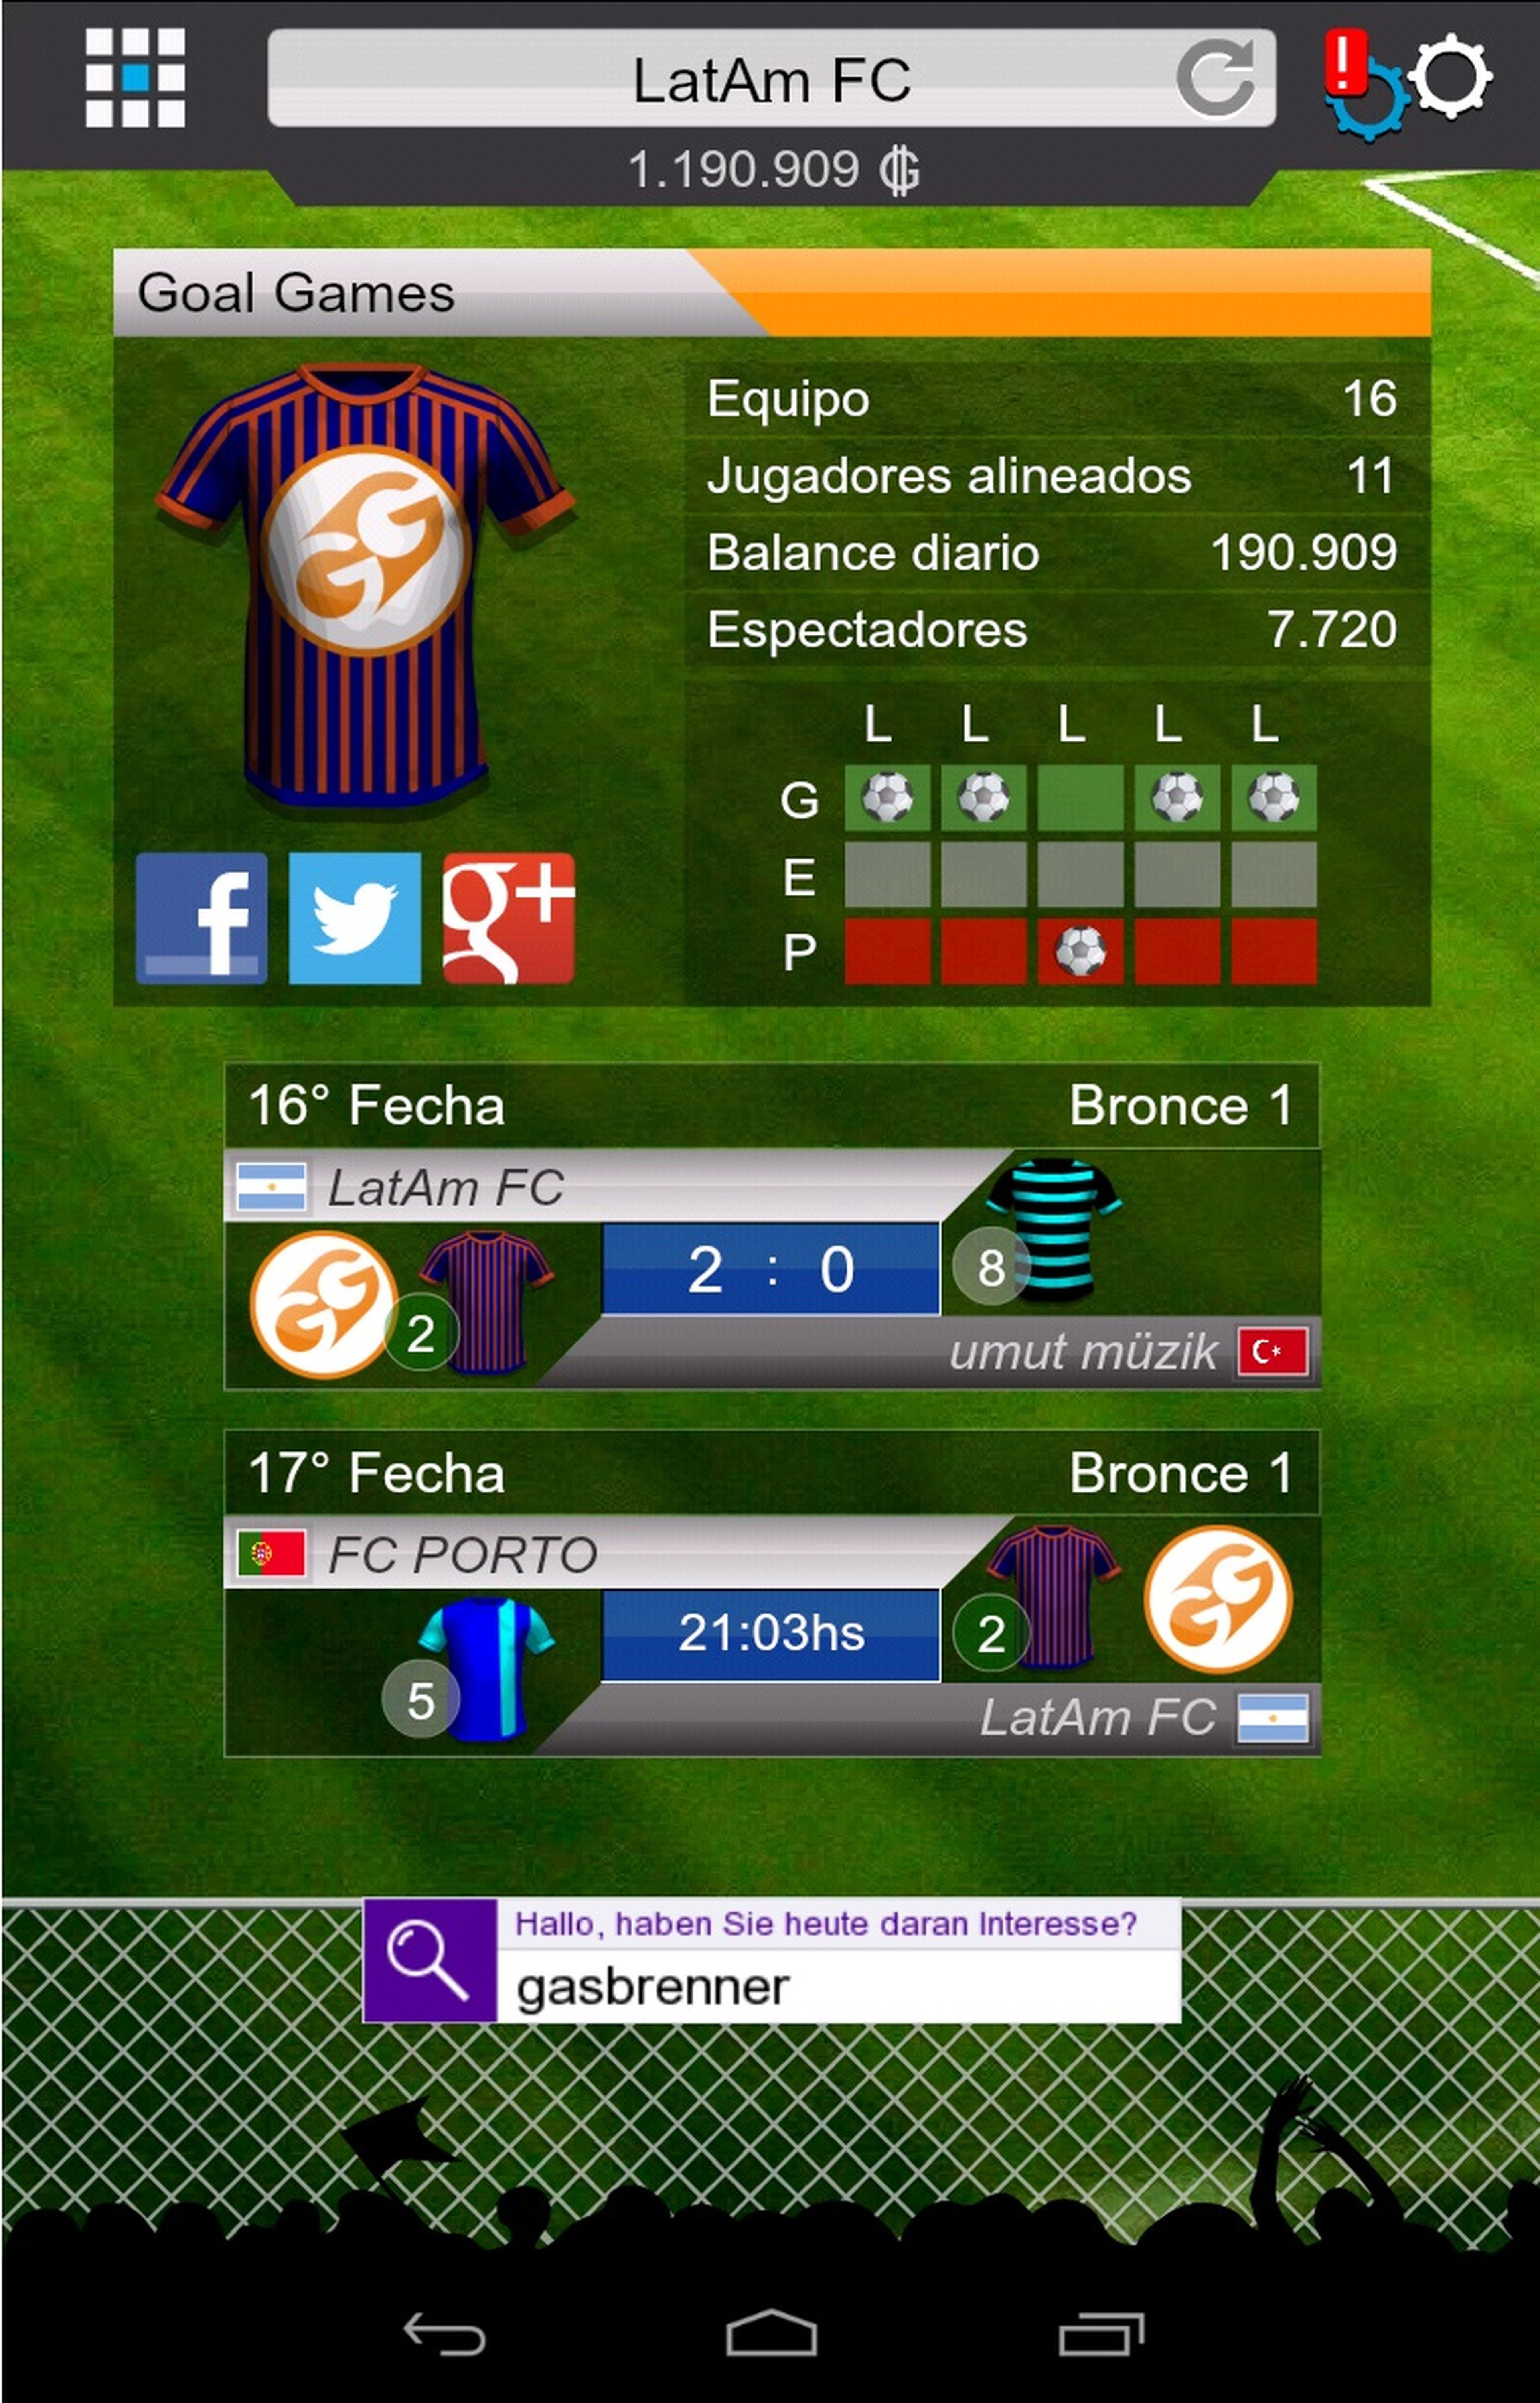 Ya disponible GOAL 2014 Football Manager para iOS y Android